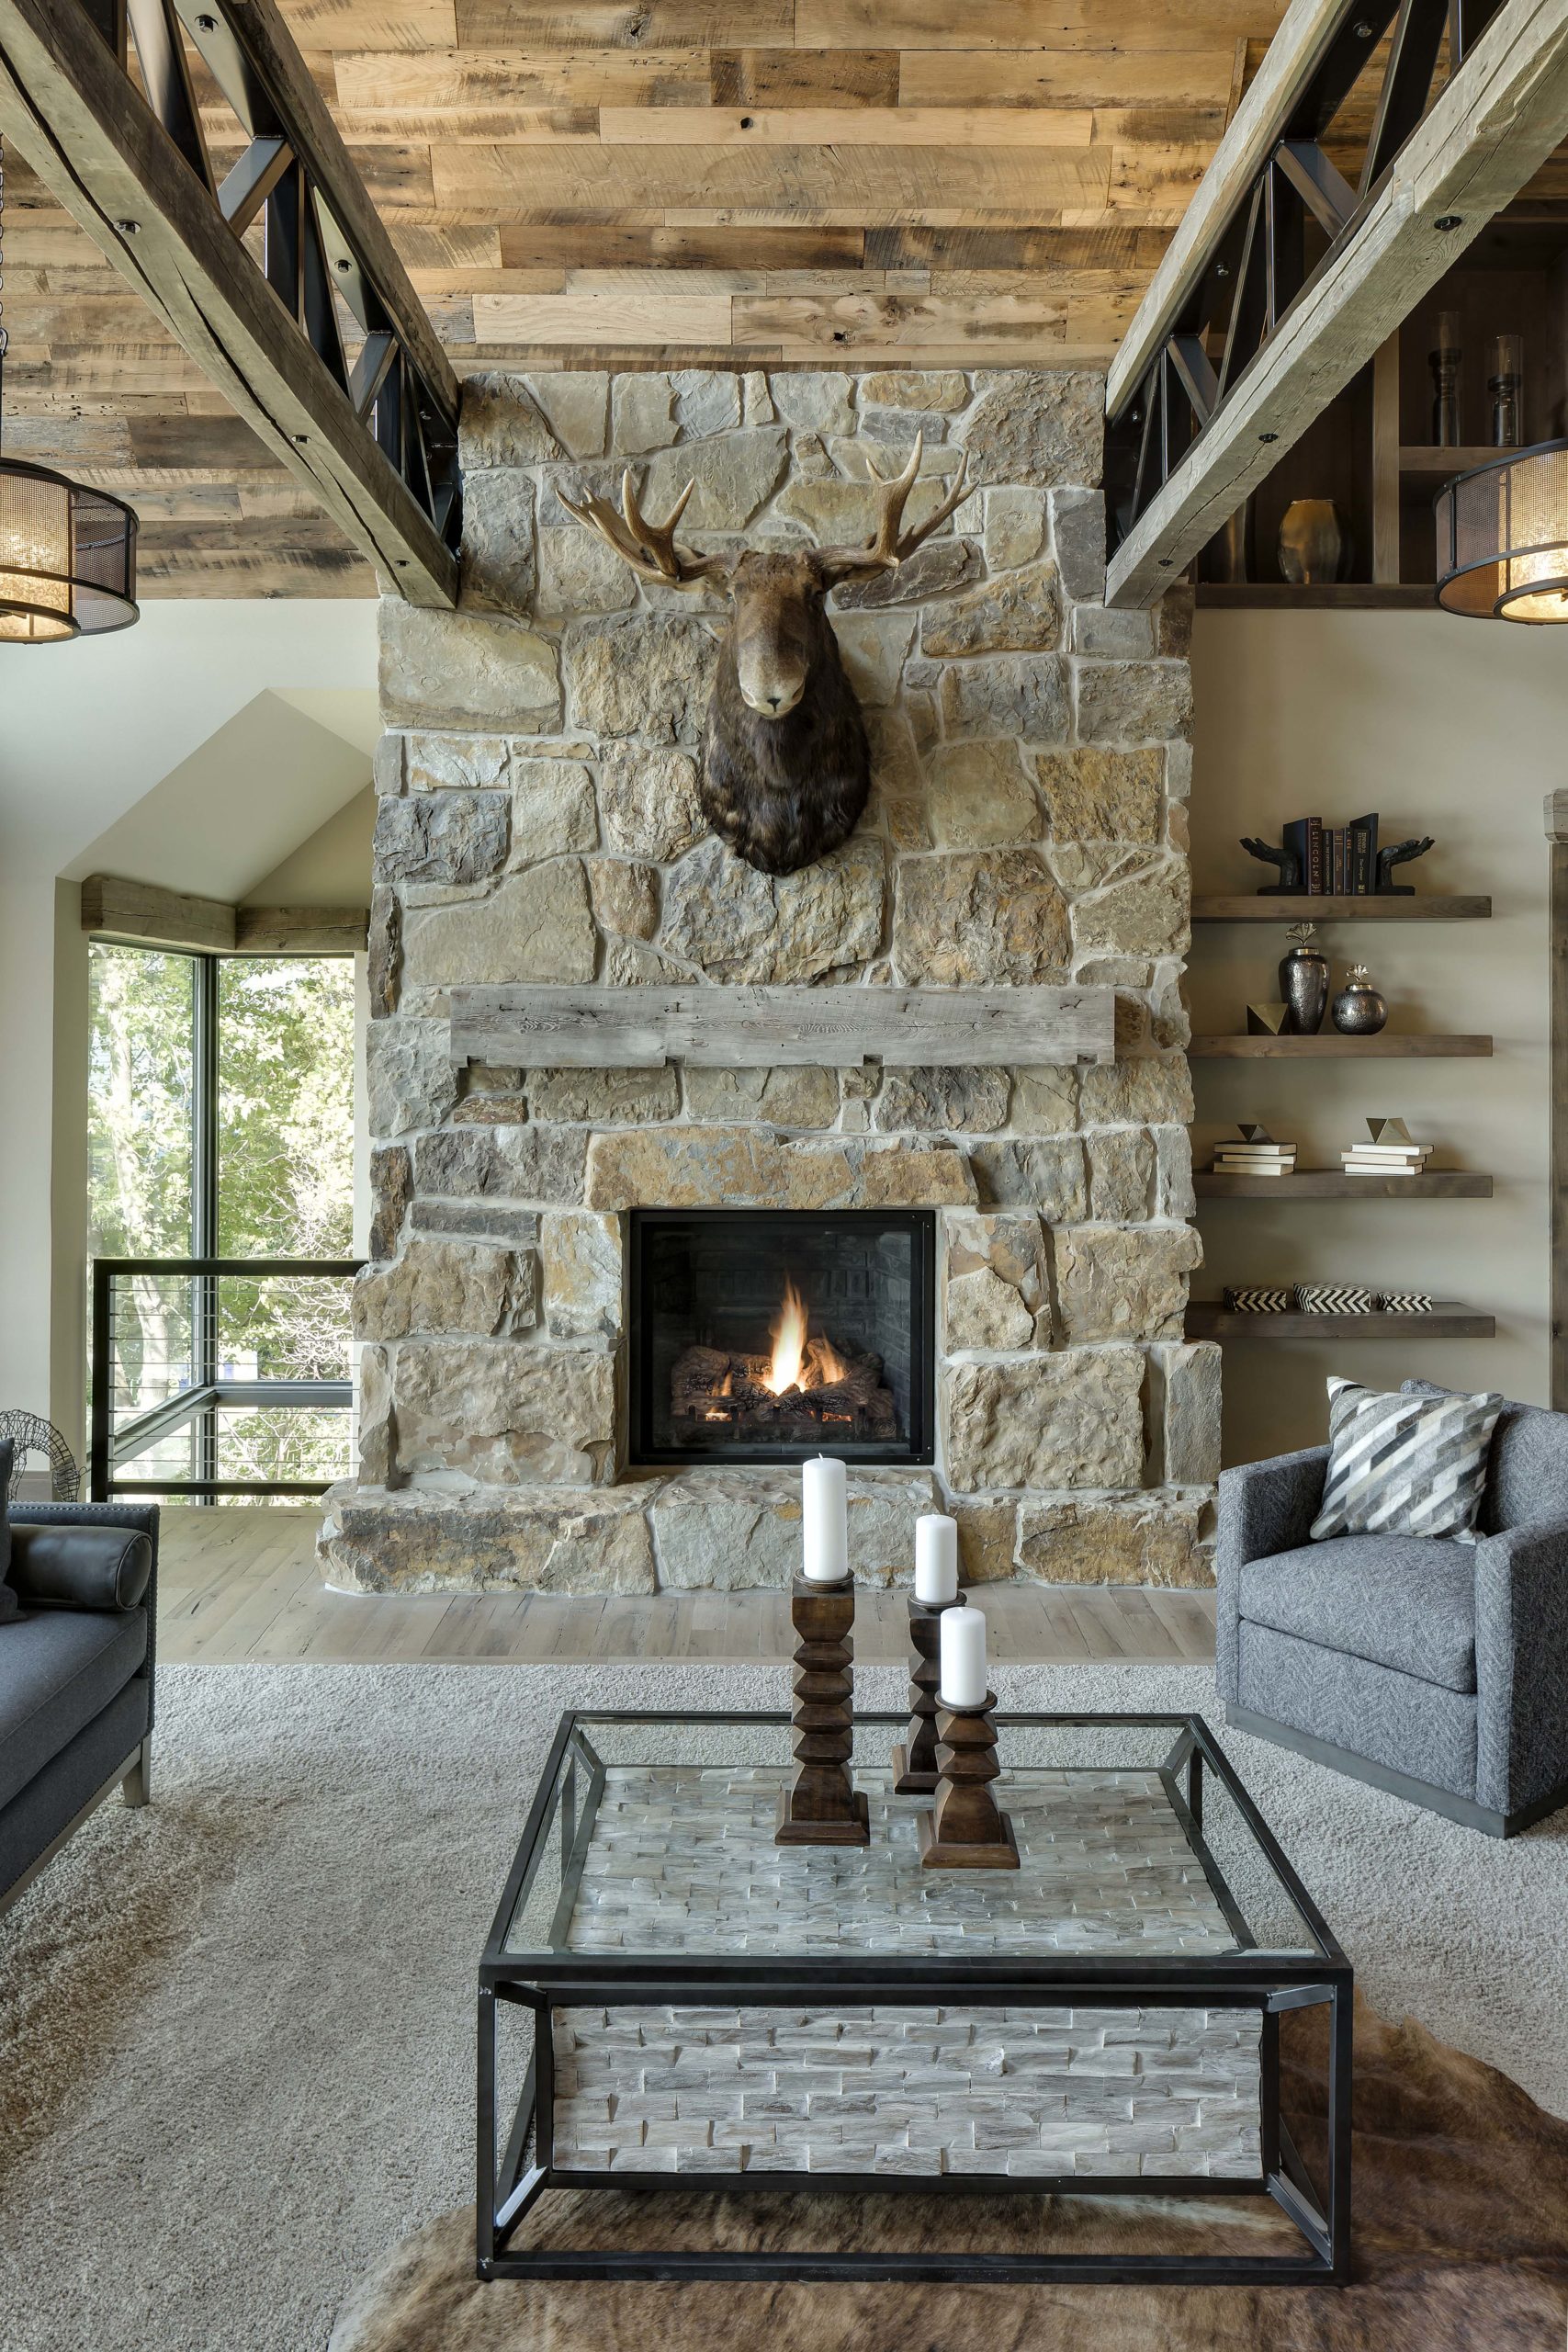 A living room with a stone fireplace and a deer head.